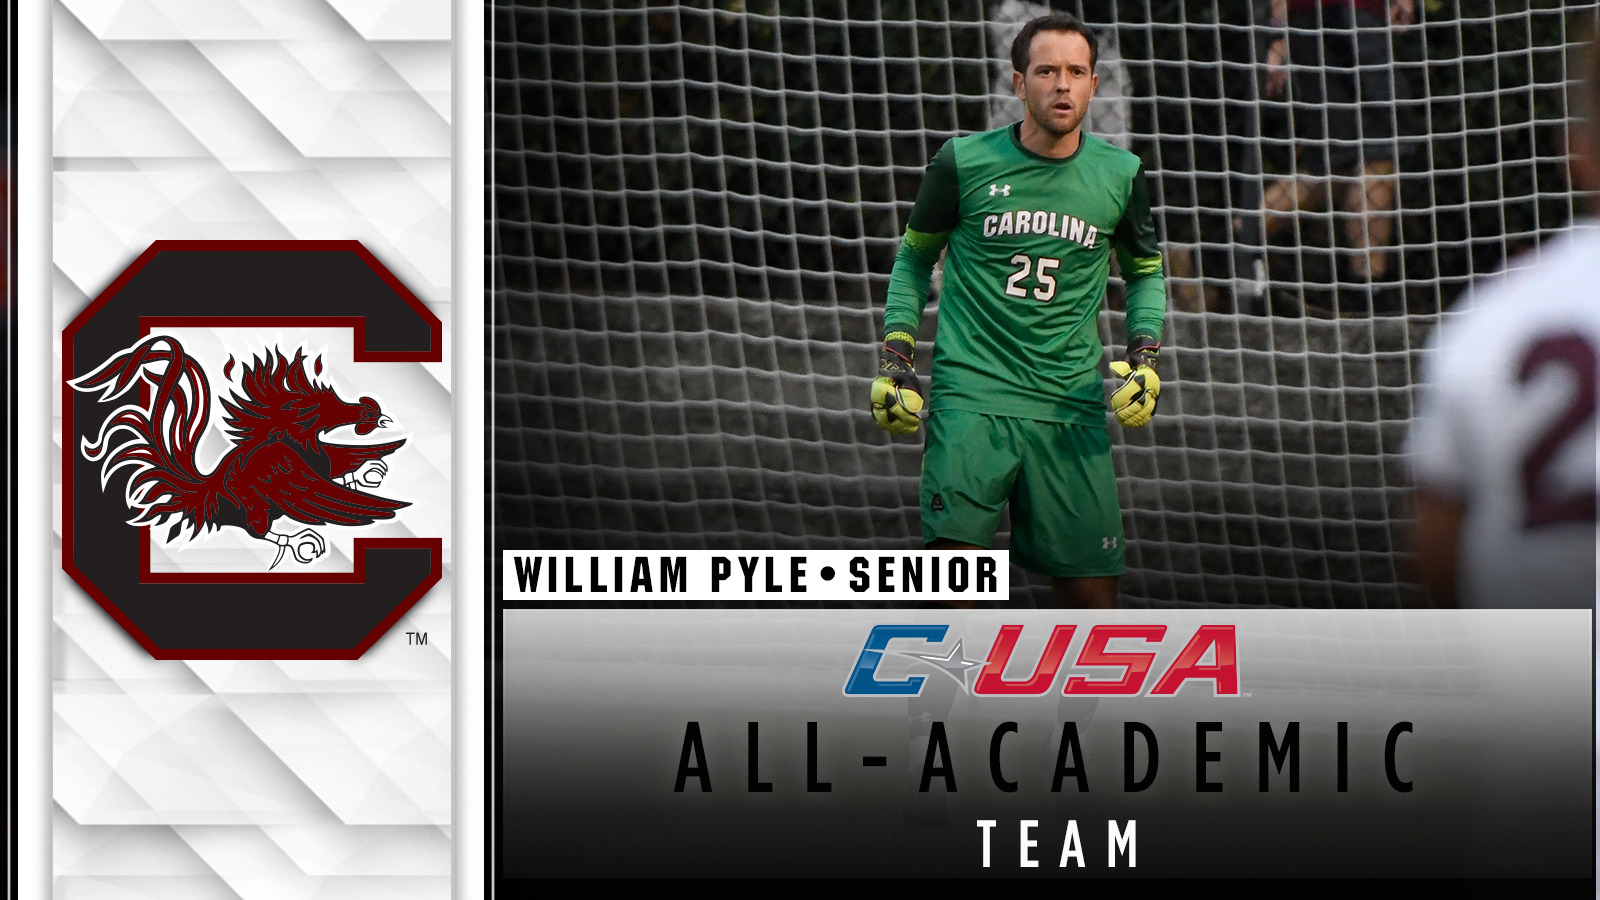 Pyle Named to C-USA All-Academic Team